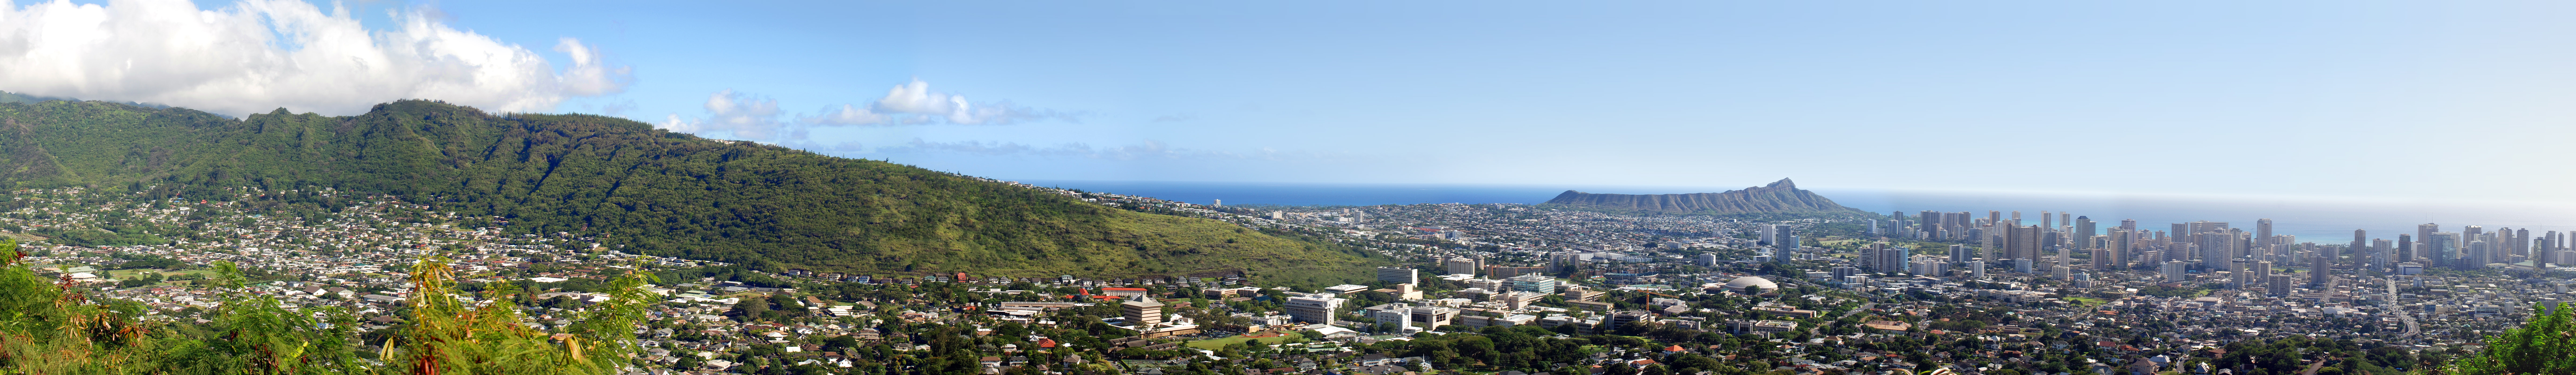 Waikiki Manoa Valley And Honolulu From Round Top Drive Travel